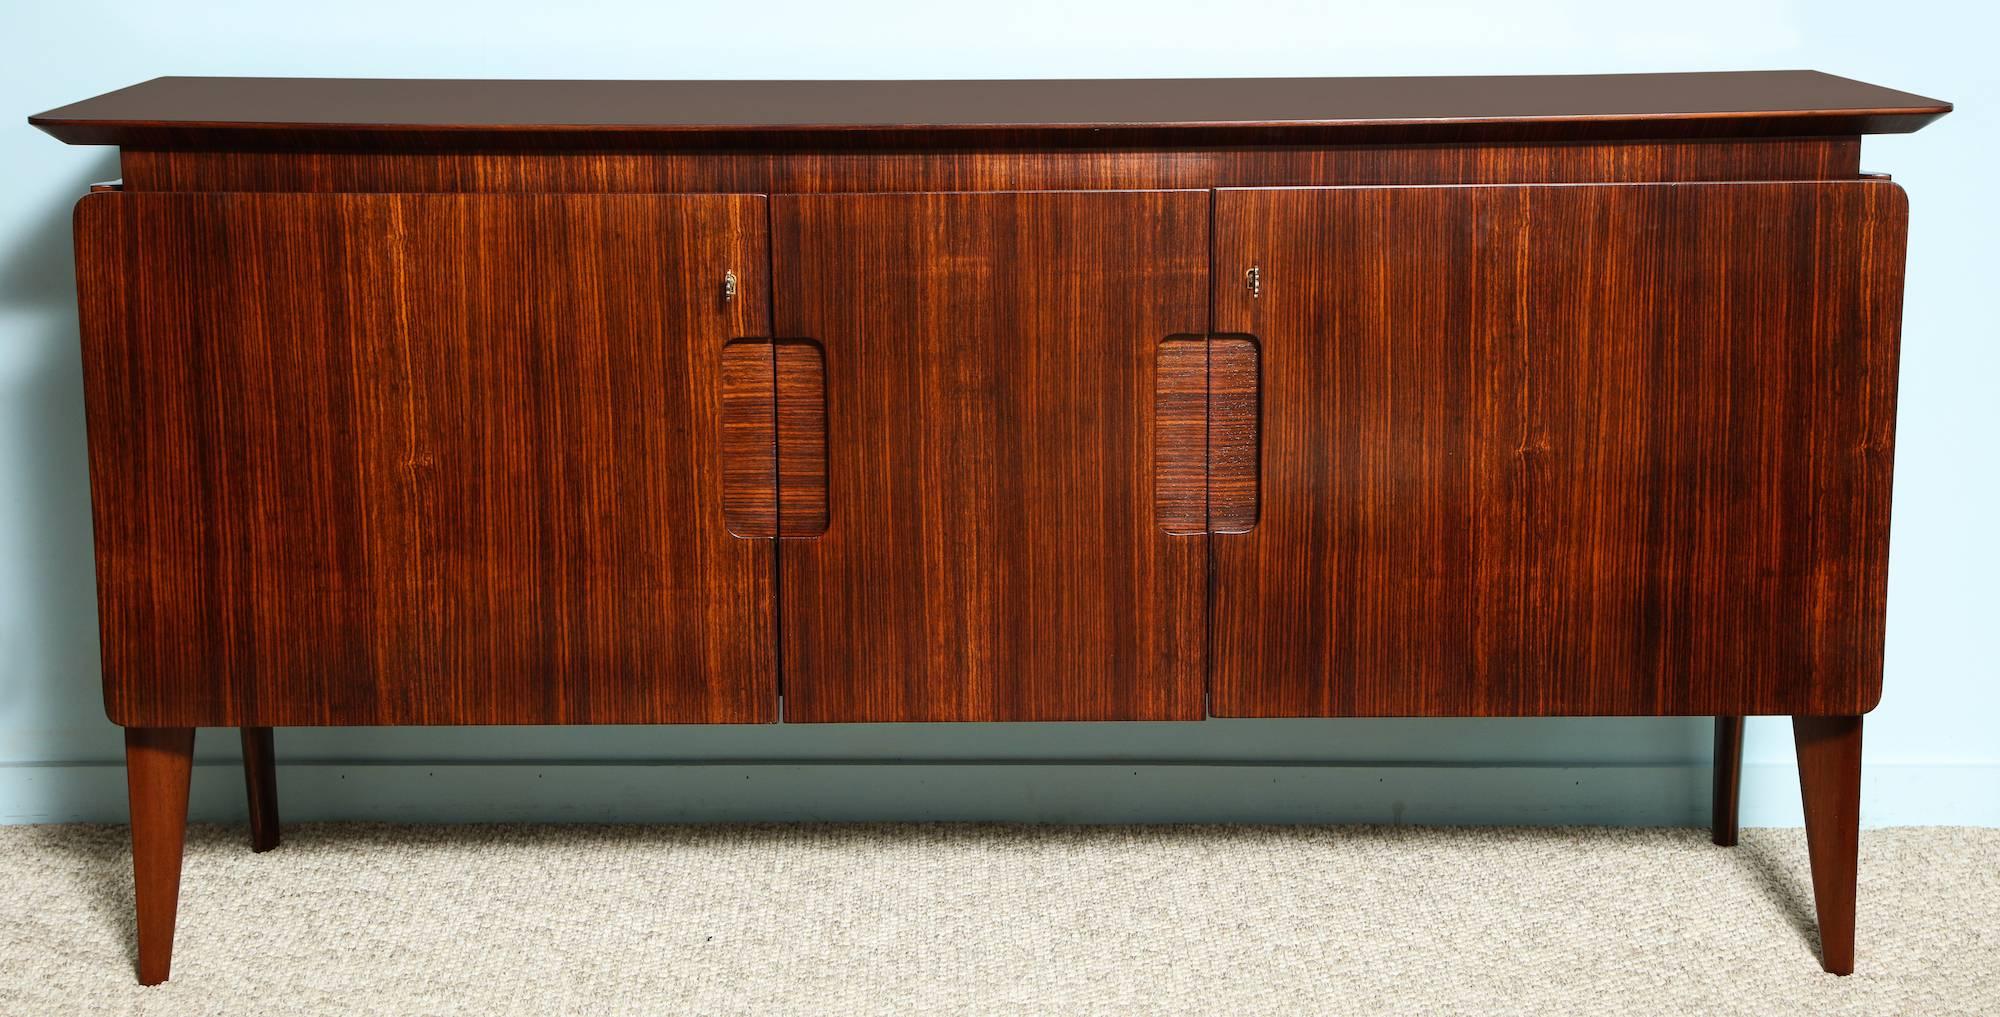 Rare two-door sideboard by Ico Parisi. Cabinet of Indian rosewood with inset panels that act as door pulls. Raised door panels, beveled edges, and shaped legs. Both doors open to reveal storage with interior shelf. Manufactured by Rizzi, Cantu,